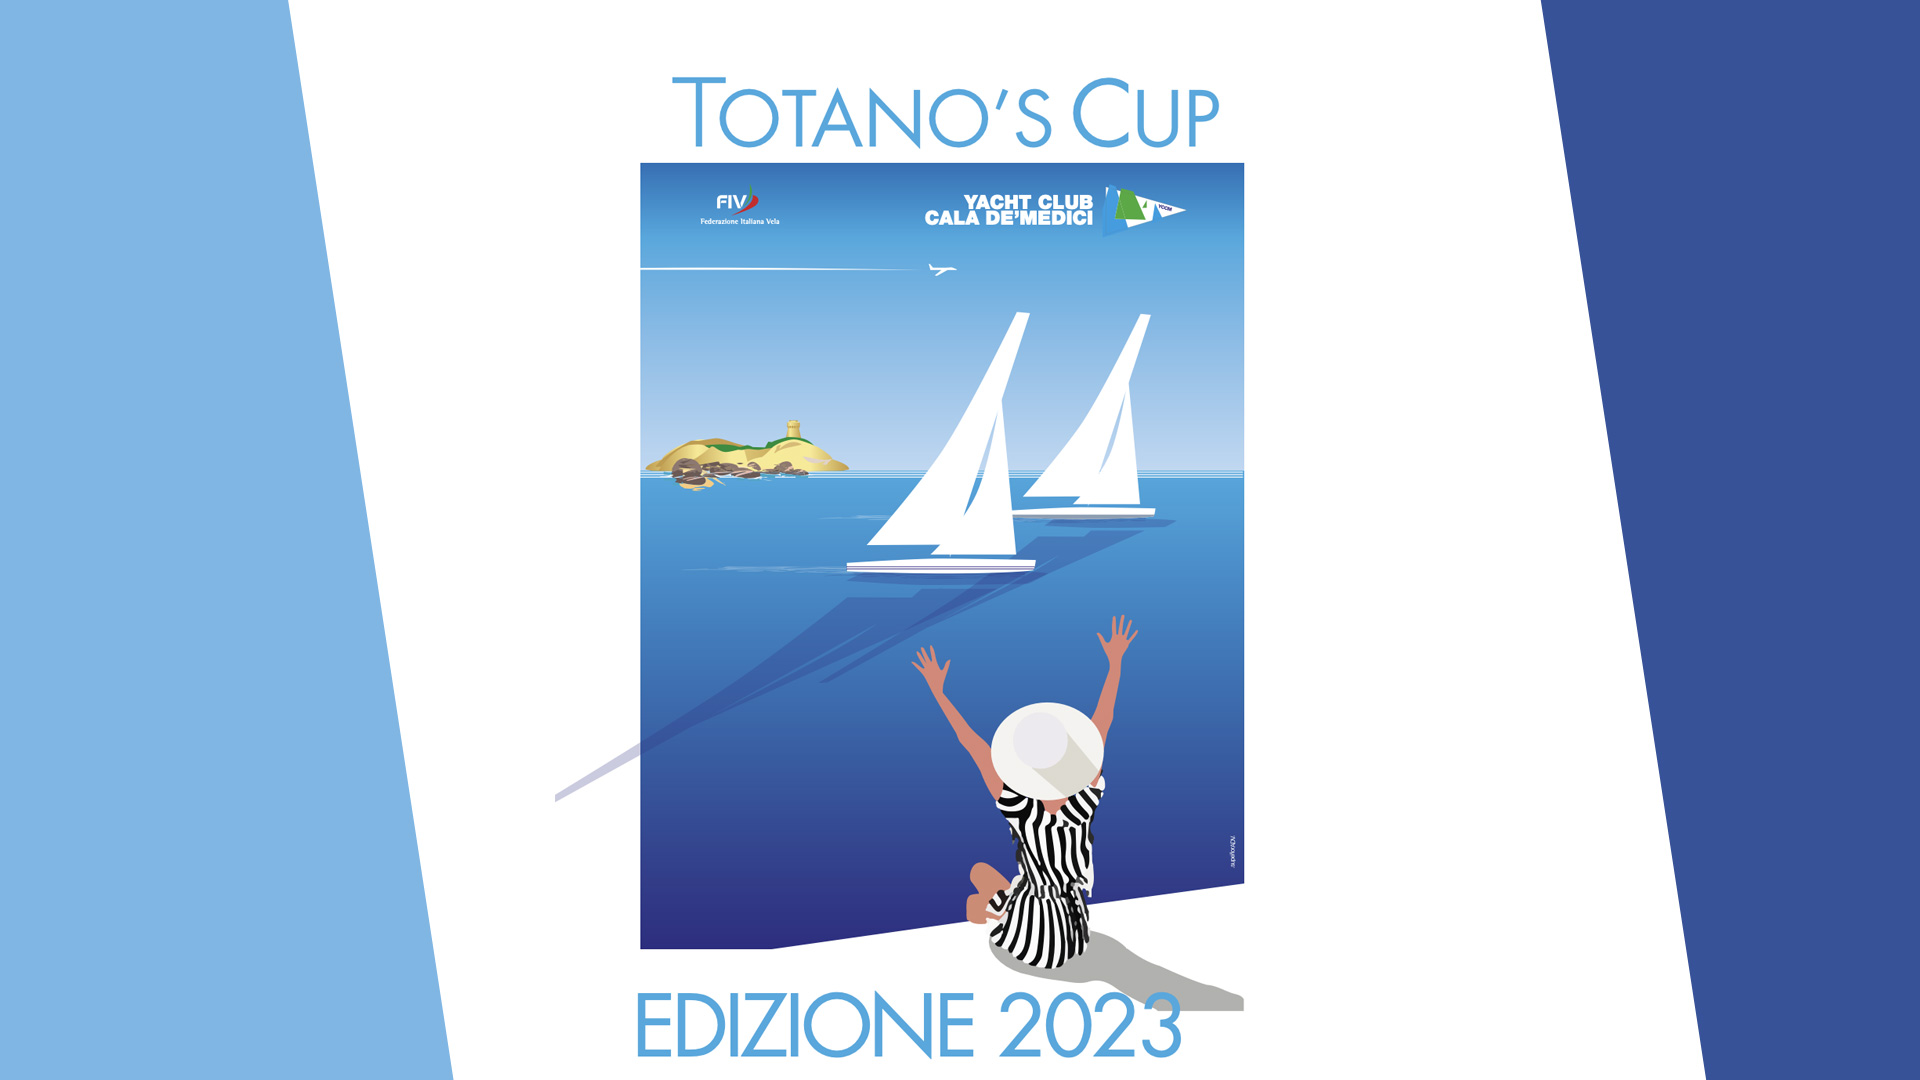 Totano's Cup 2023